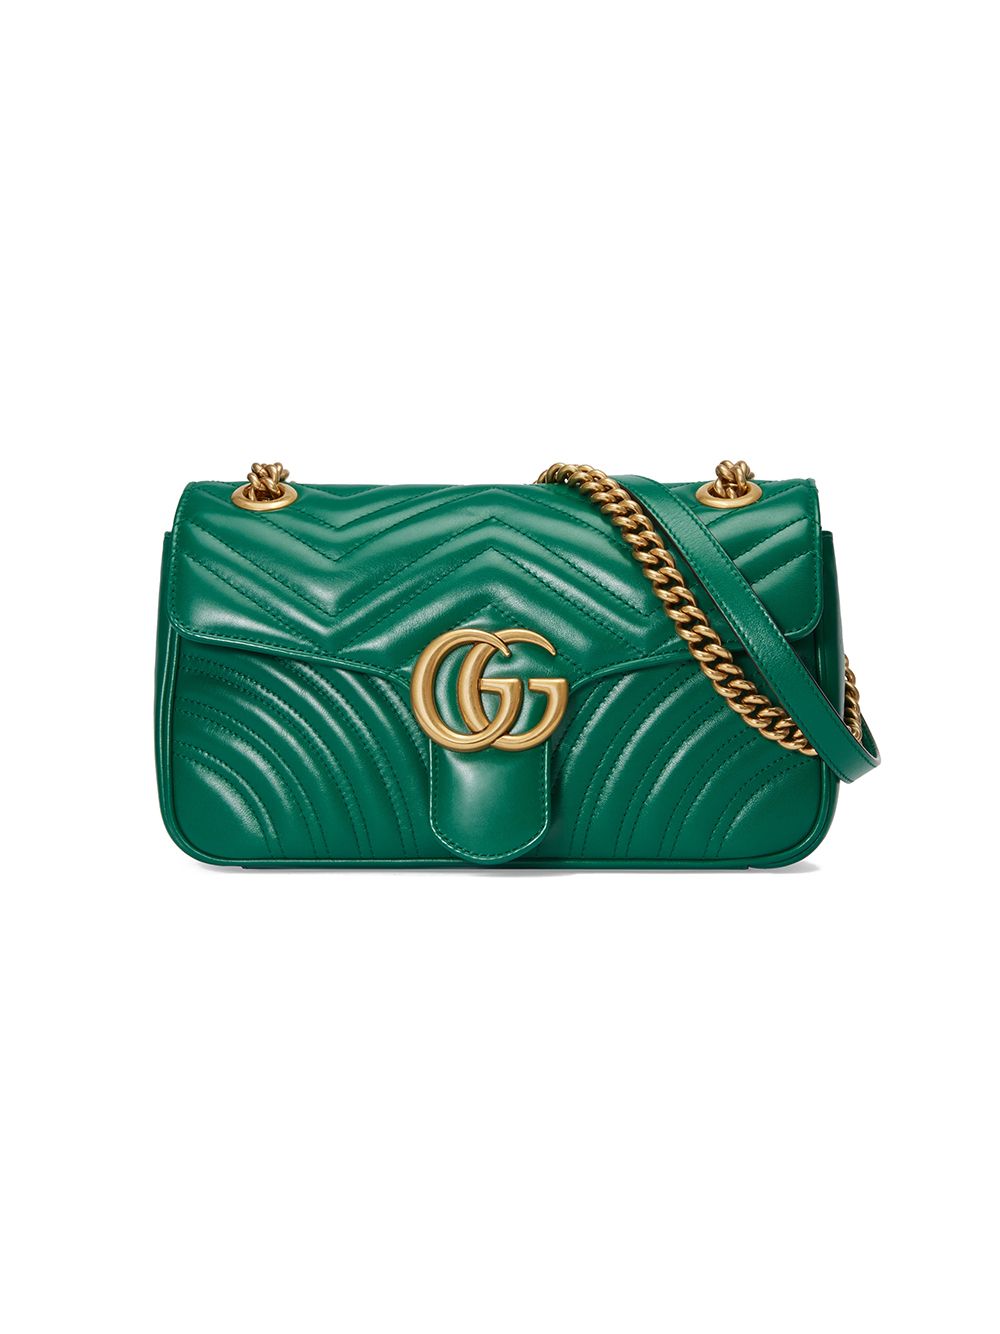 Green Gucci Gg Marmont Small Shoulder Bag For Women 